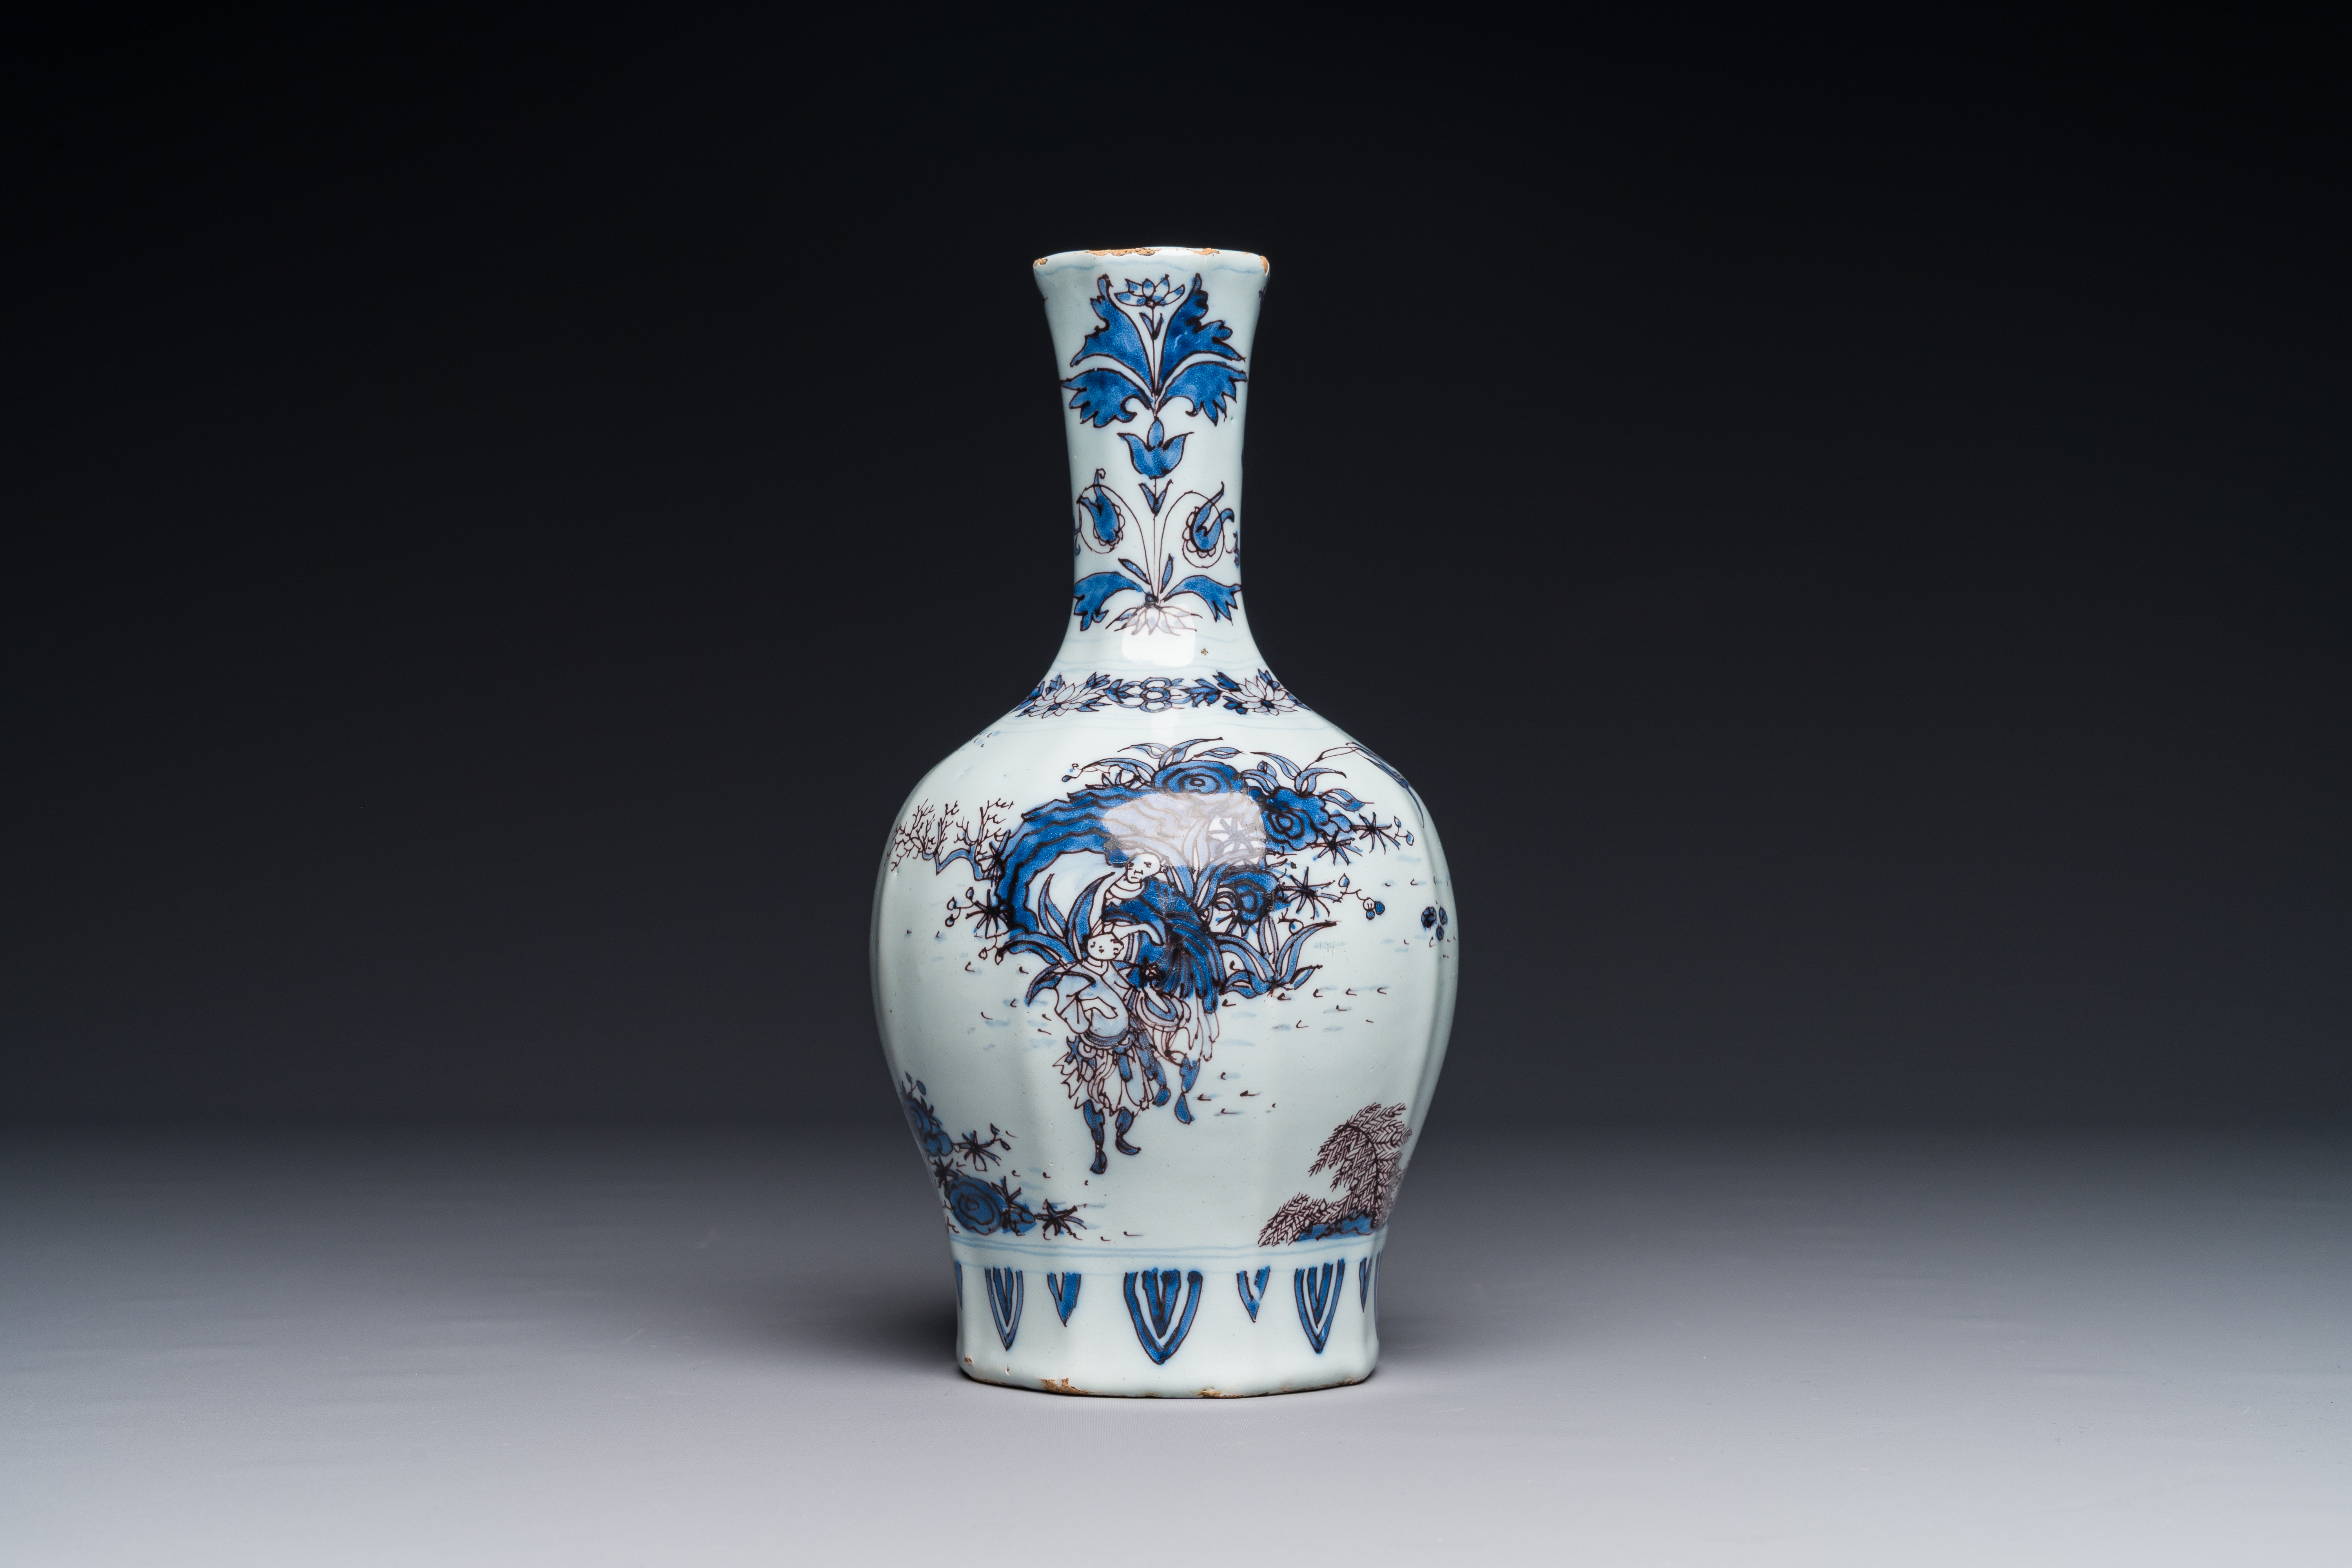 A fine Dutch Delft blue, white and manganese chinoiserie bottle vase, late 17th C. - Image 3 of 7